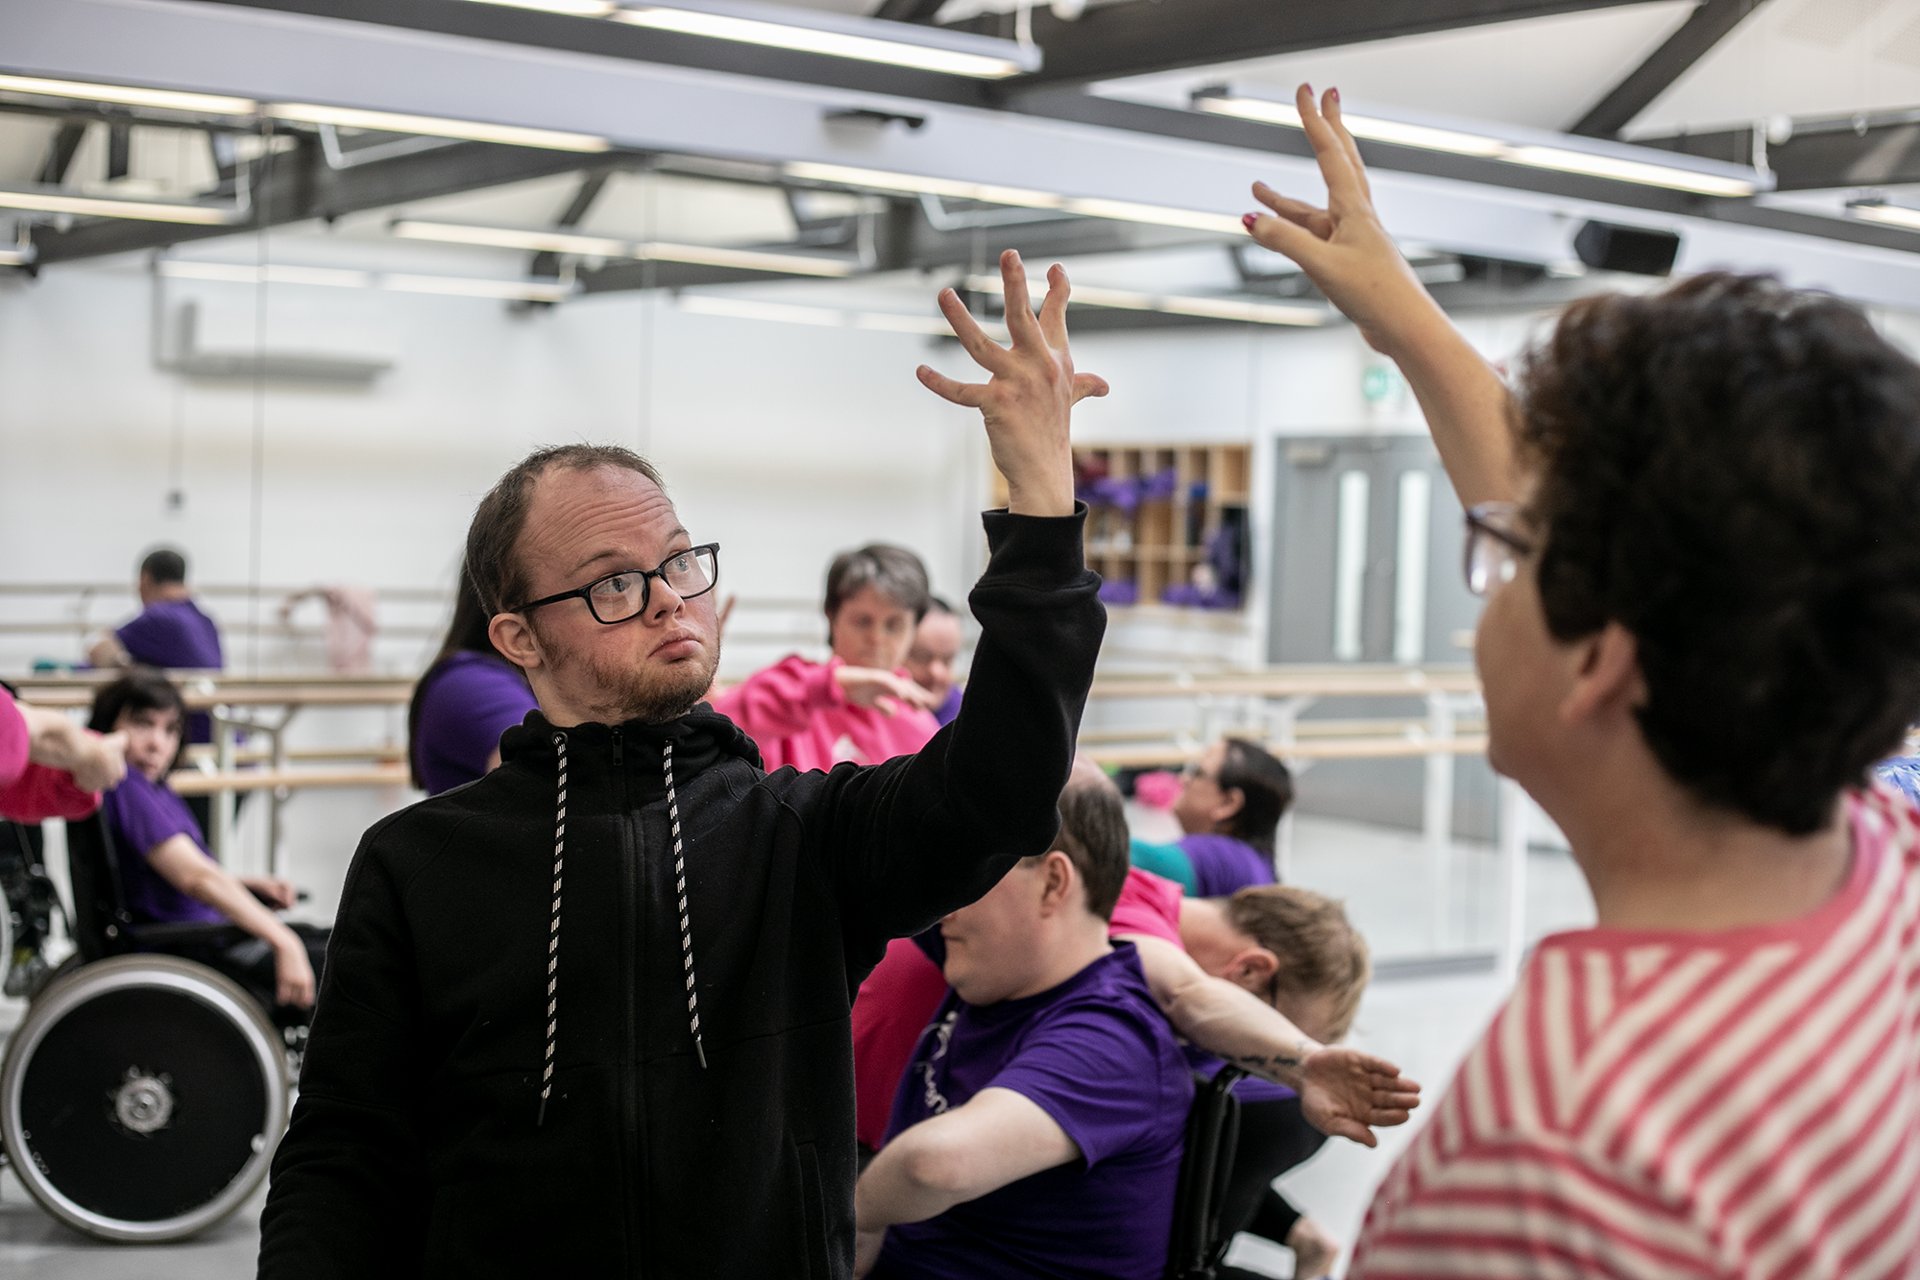 community dance group in the dance studio. Main focus on male downs syndrome dancer with hand stretched wide with other another dancer mirroring it. 